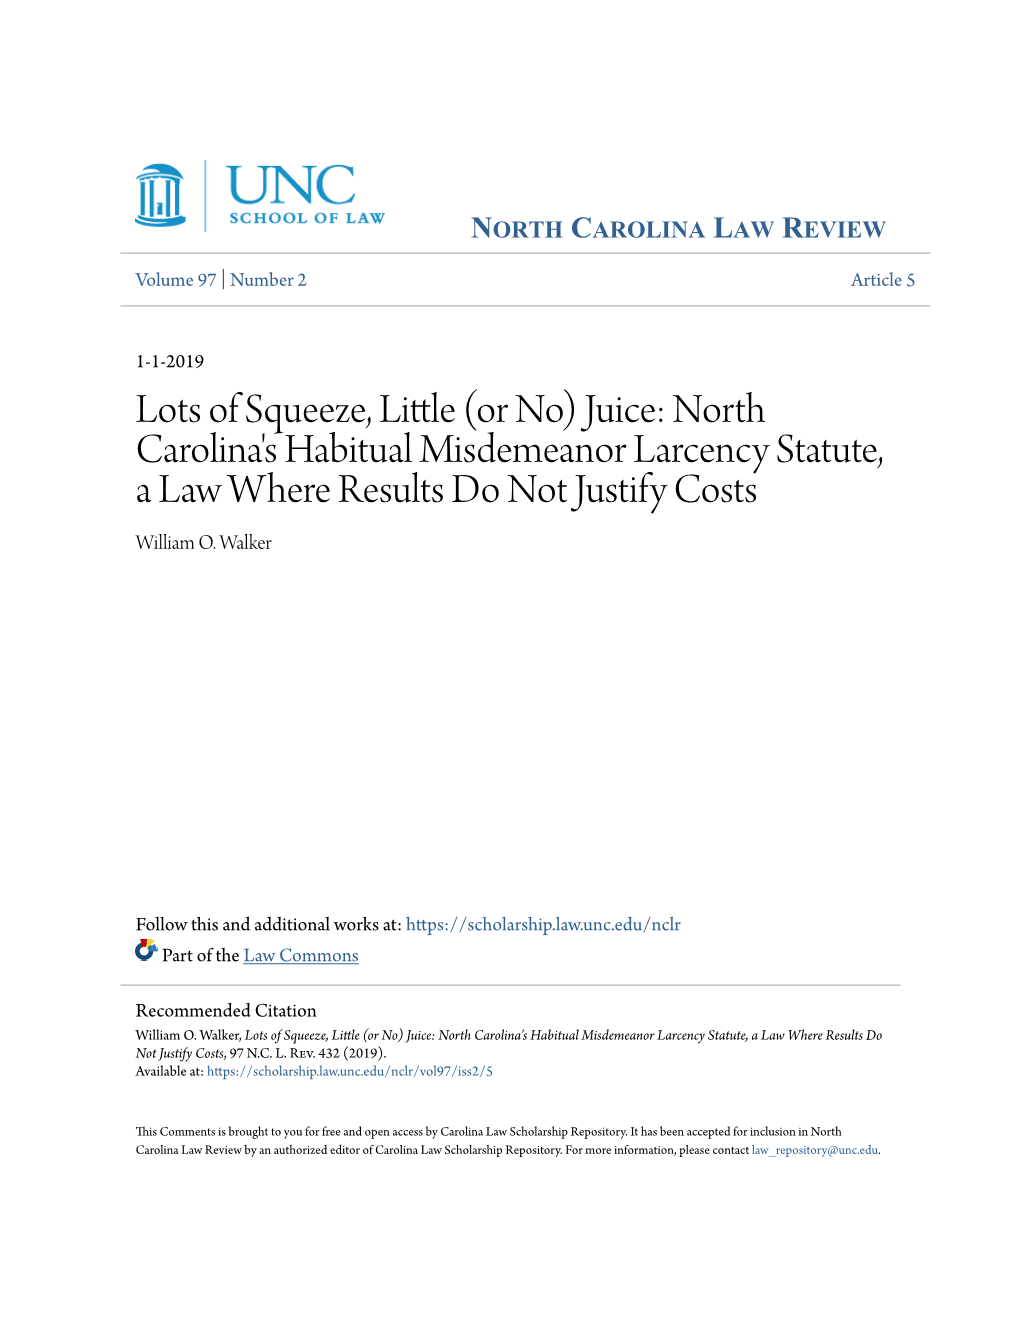 Juice: North Carolina's Habitual Misdemeanor Larcency Statute, a Law Where Results Do Not Justify Costs William O